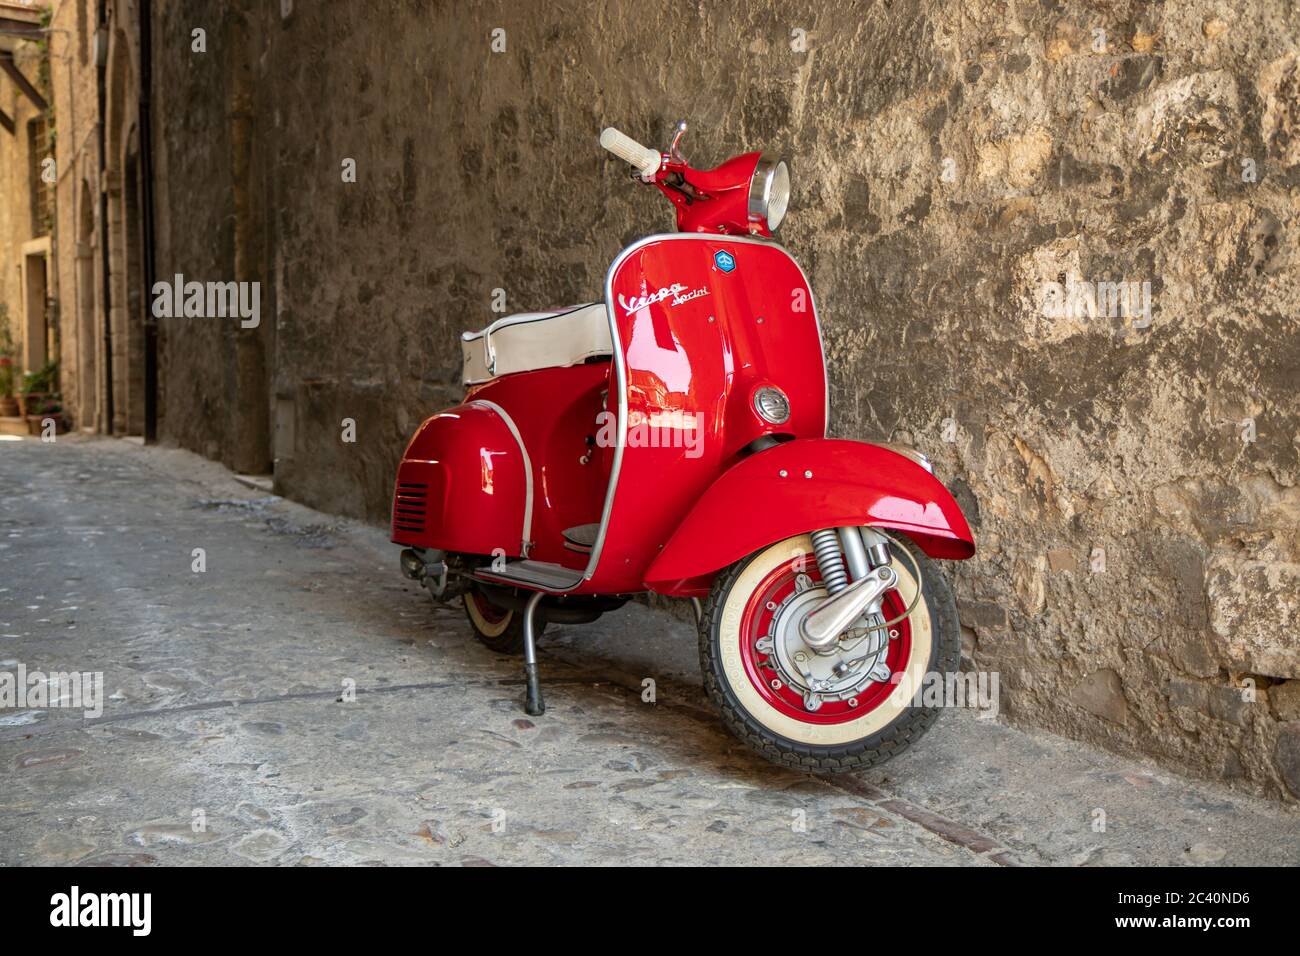 June 30, 2019 - Rome, Lazio, Italy - A red Piaggio Vespa Sprint, parked in an alleyway of an ancient village, in Italy. The scooter symbol of Italian Stock Photo